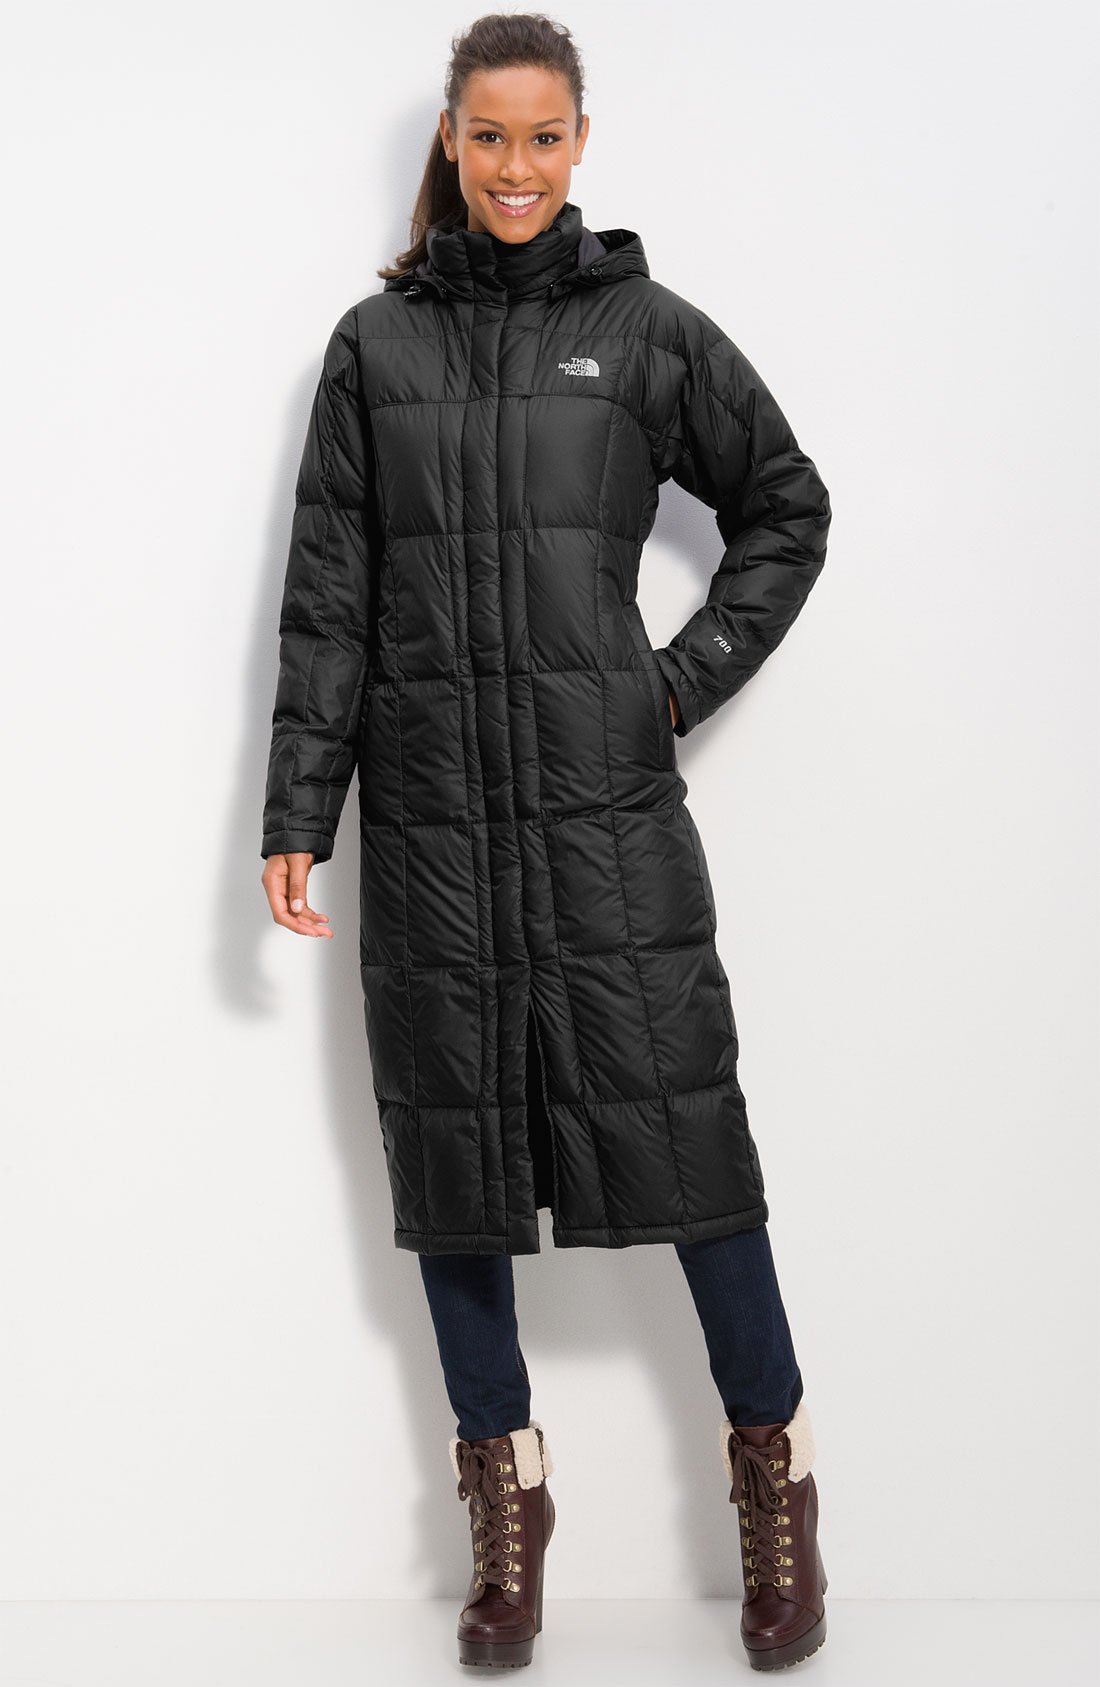 North face jackets long - Best stores teenage girl, outfits 2020 ...